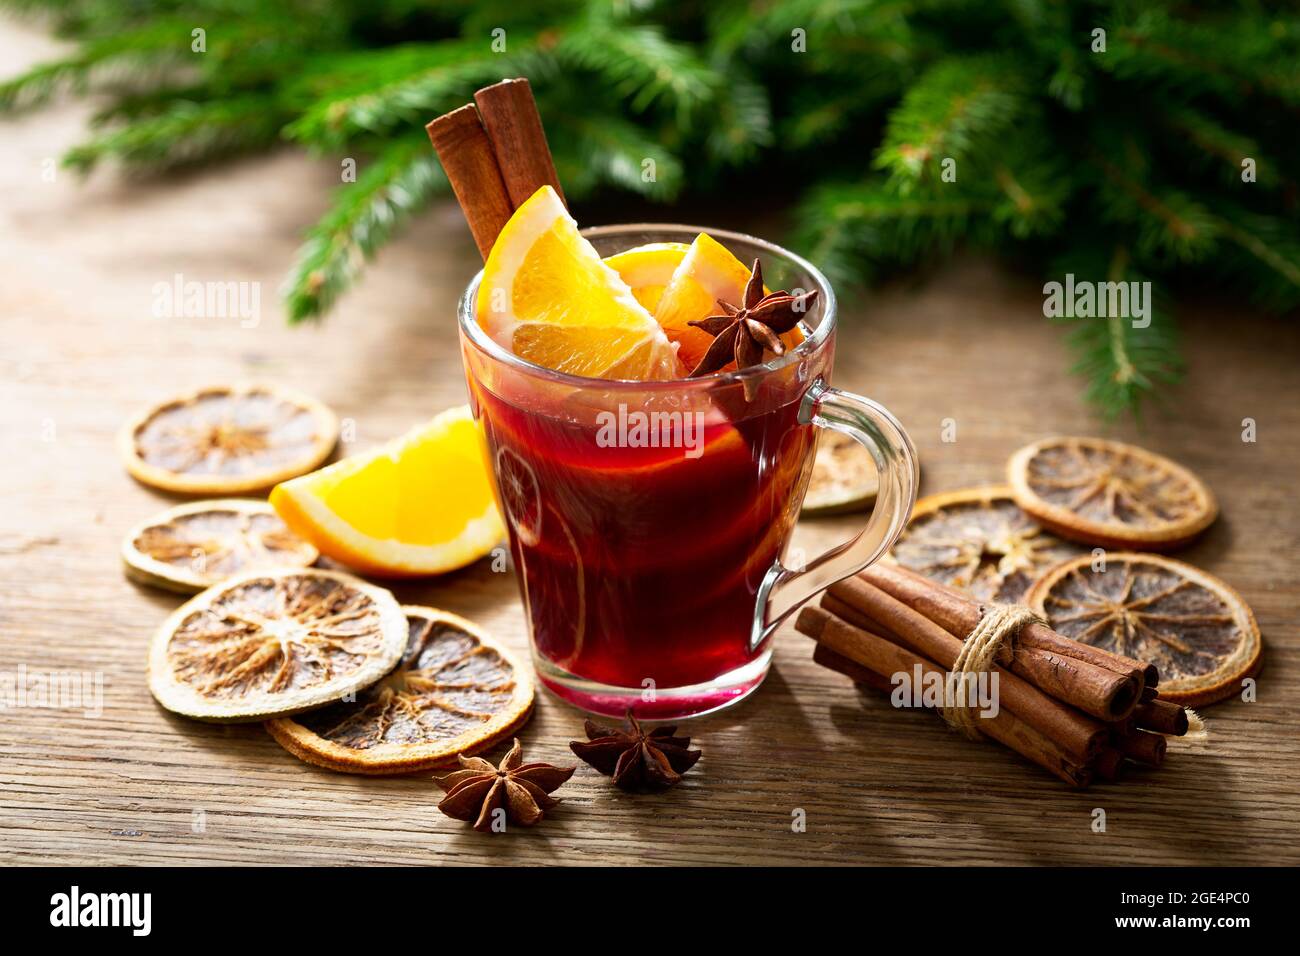 Christmas drink. Glass of hot mulled wine with oranges, anise and cinnamon on festive background Stock Photo